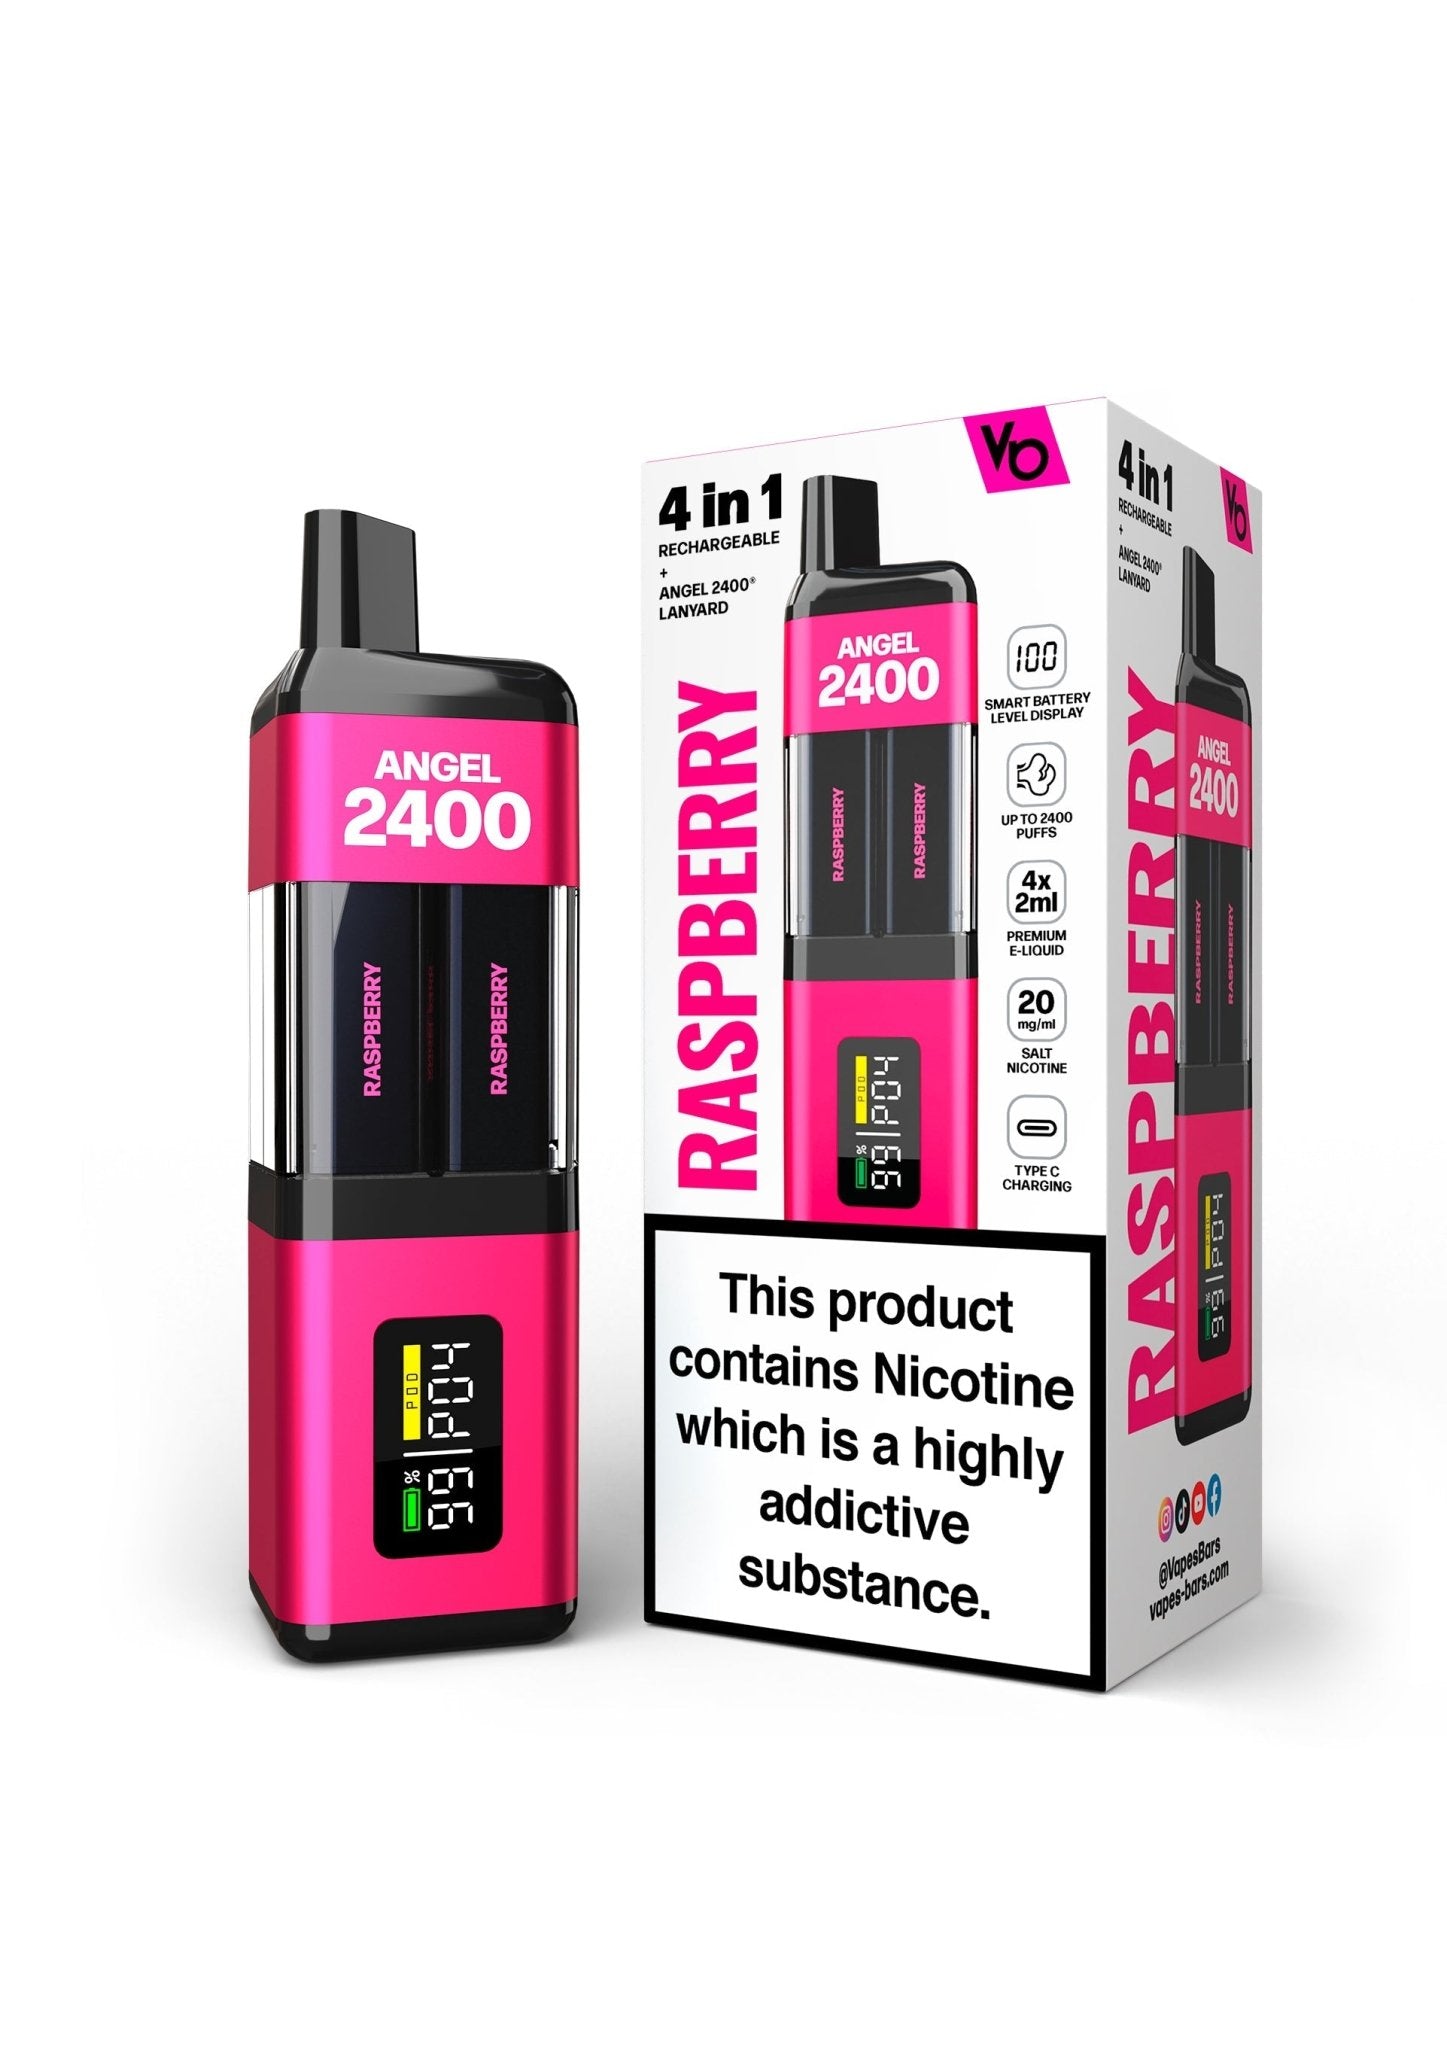 Angel 2400 Puffs Disposble Vape by Vapes Bars - Wolfvapes.co.uk-Raspberry